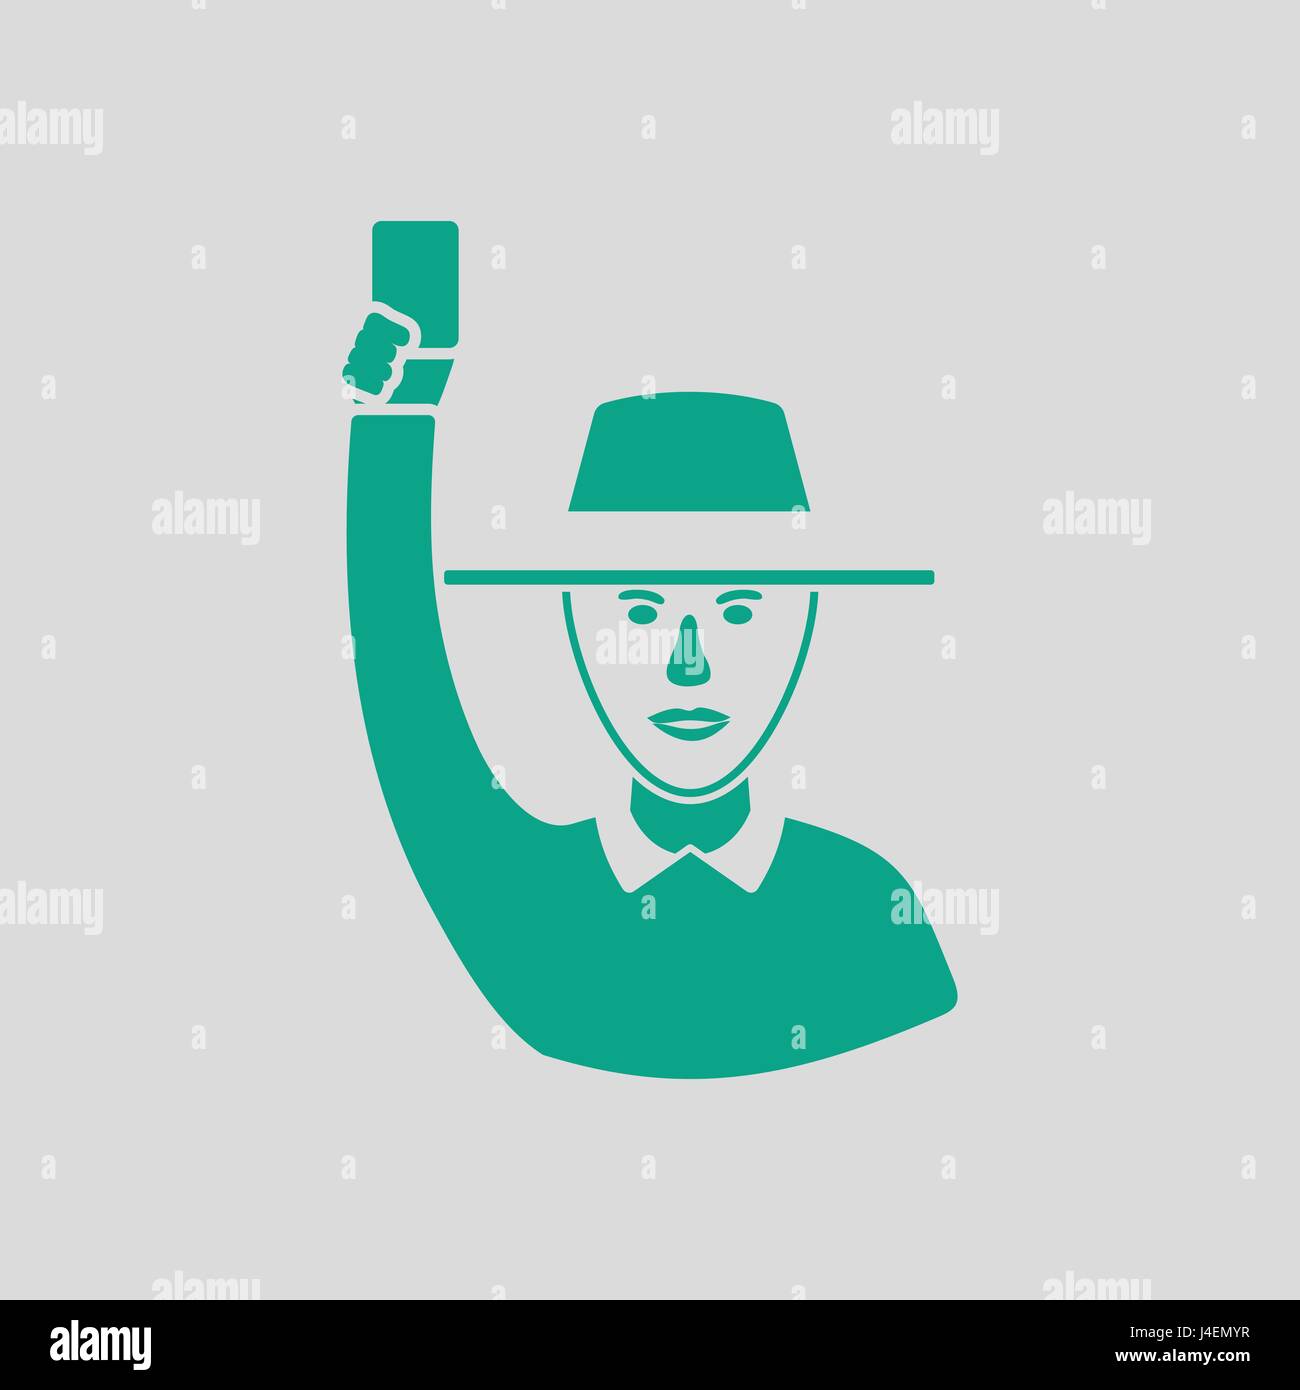 Cricket umpire with hand holding card icon. Gray background with green. Vector illustration. Stock Vector